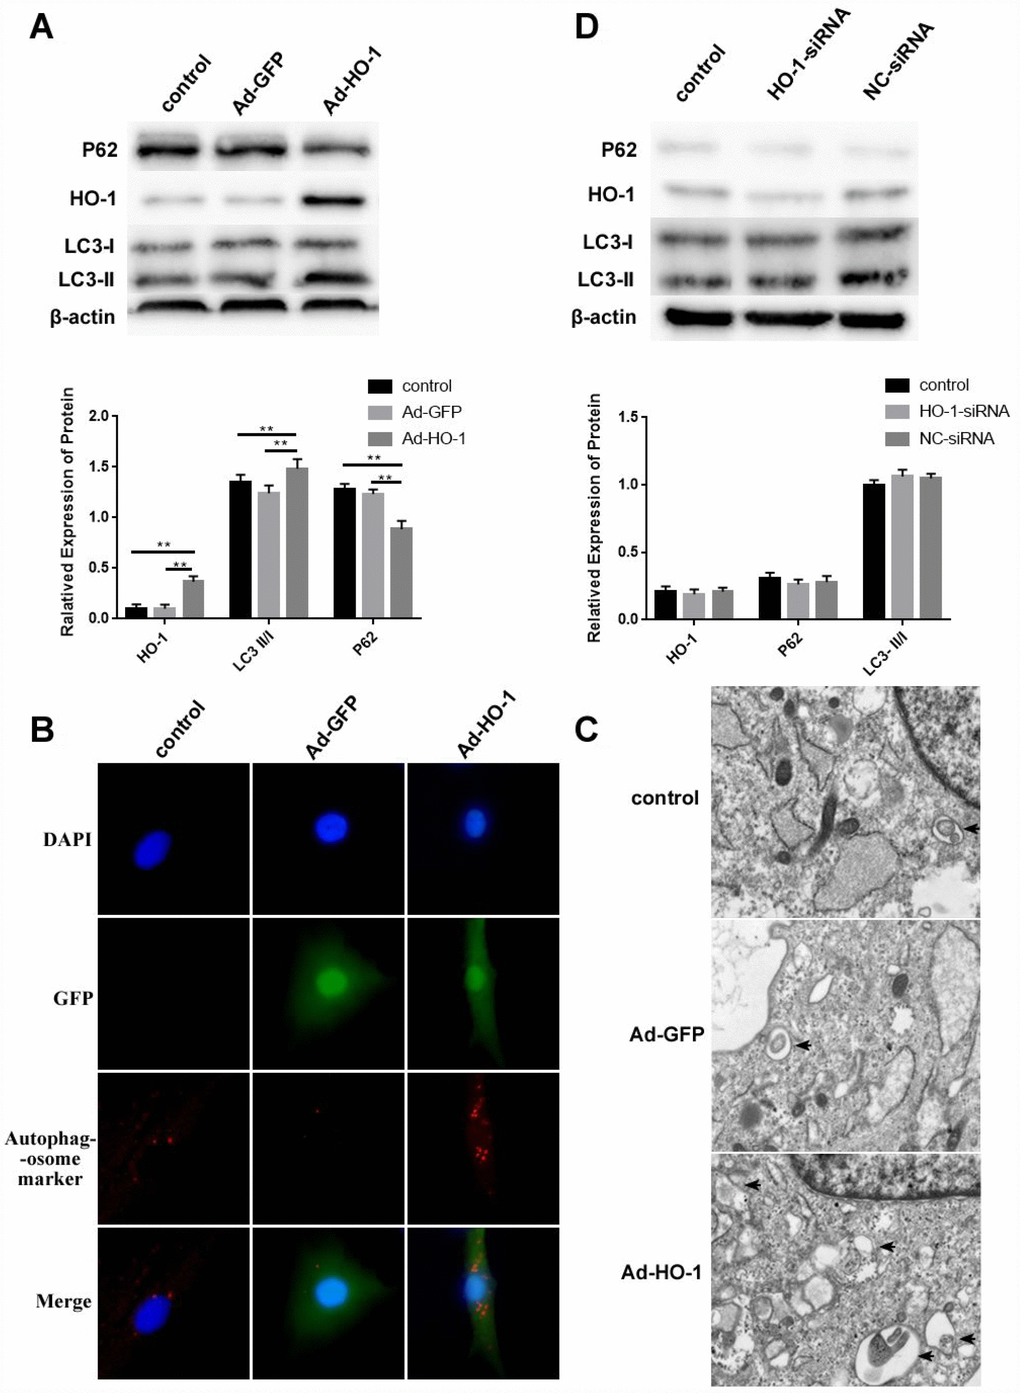 HO-1 overexpression induces autophagy in human NPCs. (A) Western bolt shows HO-1, P62 and LC3-II/I protein levels in control and HO-1 overexpressing NPCs. HO-1 overexpressing NPCs were generated by transfecting Ad-HO-1 for 48 h. Note: The data represent mean ± SD of three experiments; **pB) Immunofluorescence assay results show autophagosome formation based on staining of the control and HO-1 overexpressing NPCs with antibodies against the autophagosome marker protein SQSTM1/P62. (C) Transmission electron micrographs show characteristic double-membrane autophagosome formation (black arrows) in control and HO-1 overexpressing NPCs. (D) Western bolt shows HO-1, P62 and LC3-II/I protein levels in control and HO-1 siRNA transfected NPCs. As shown, there is no significant difference in the levels of these proteins in all experimental groups. Note: The data represent mean ± SD of three experiments.